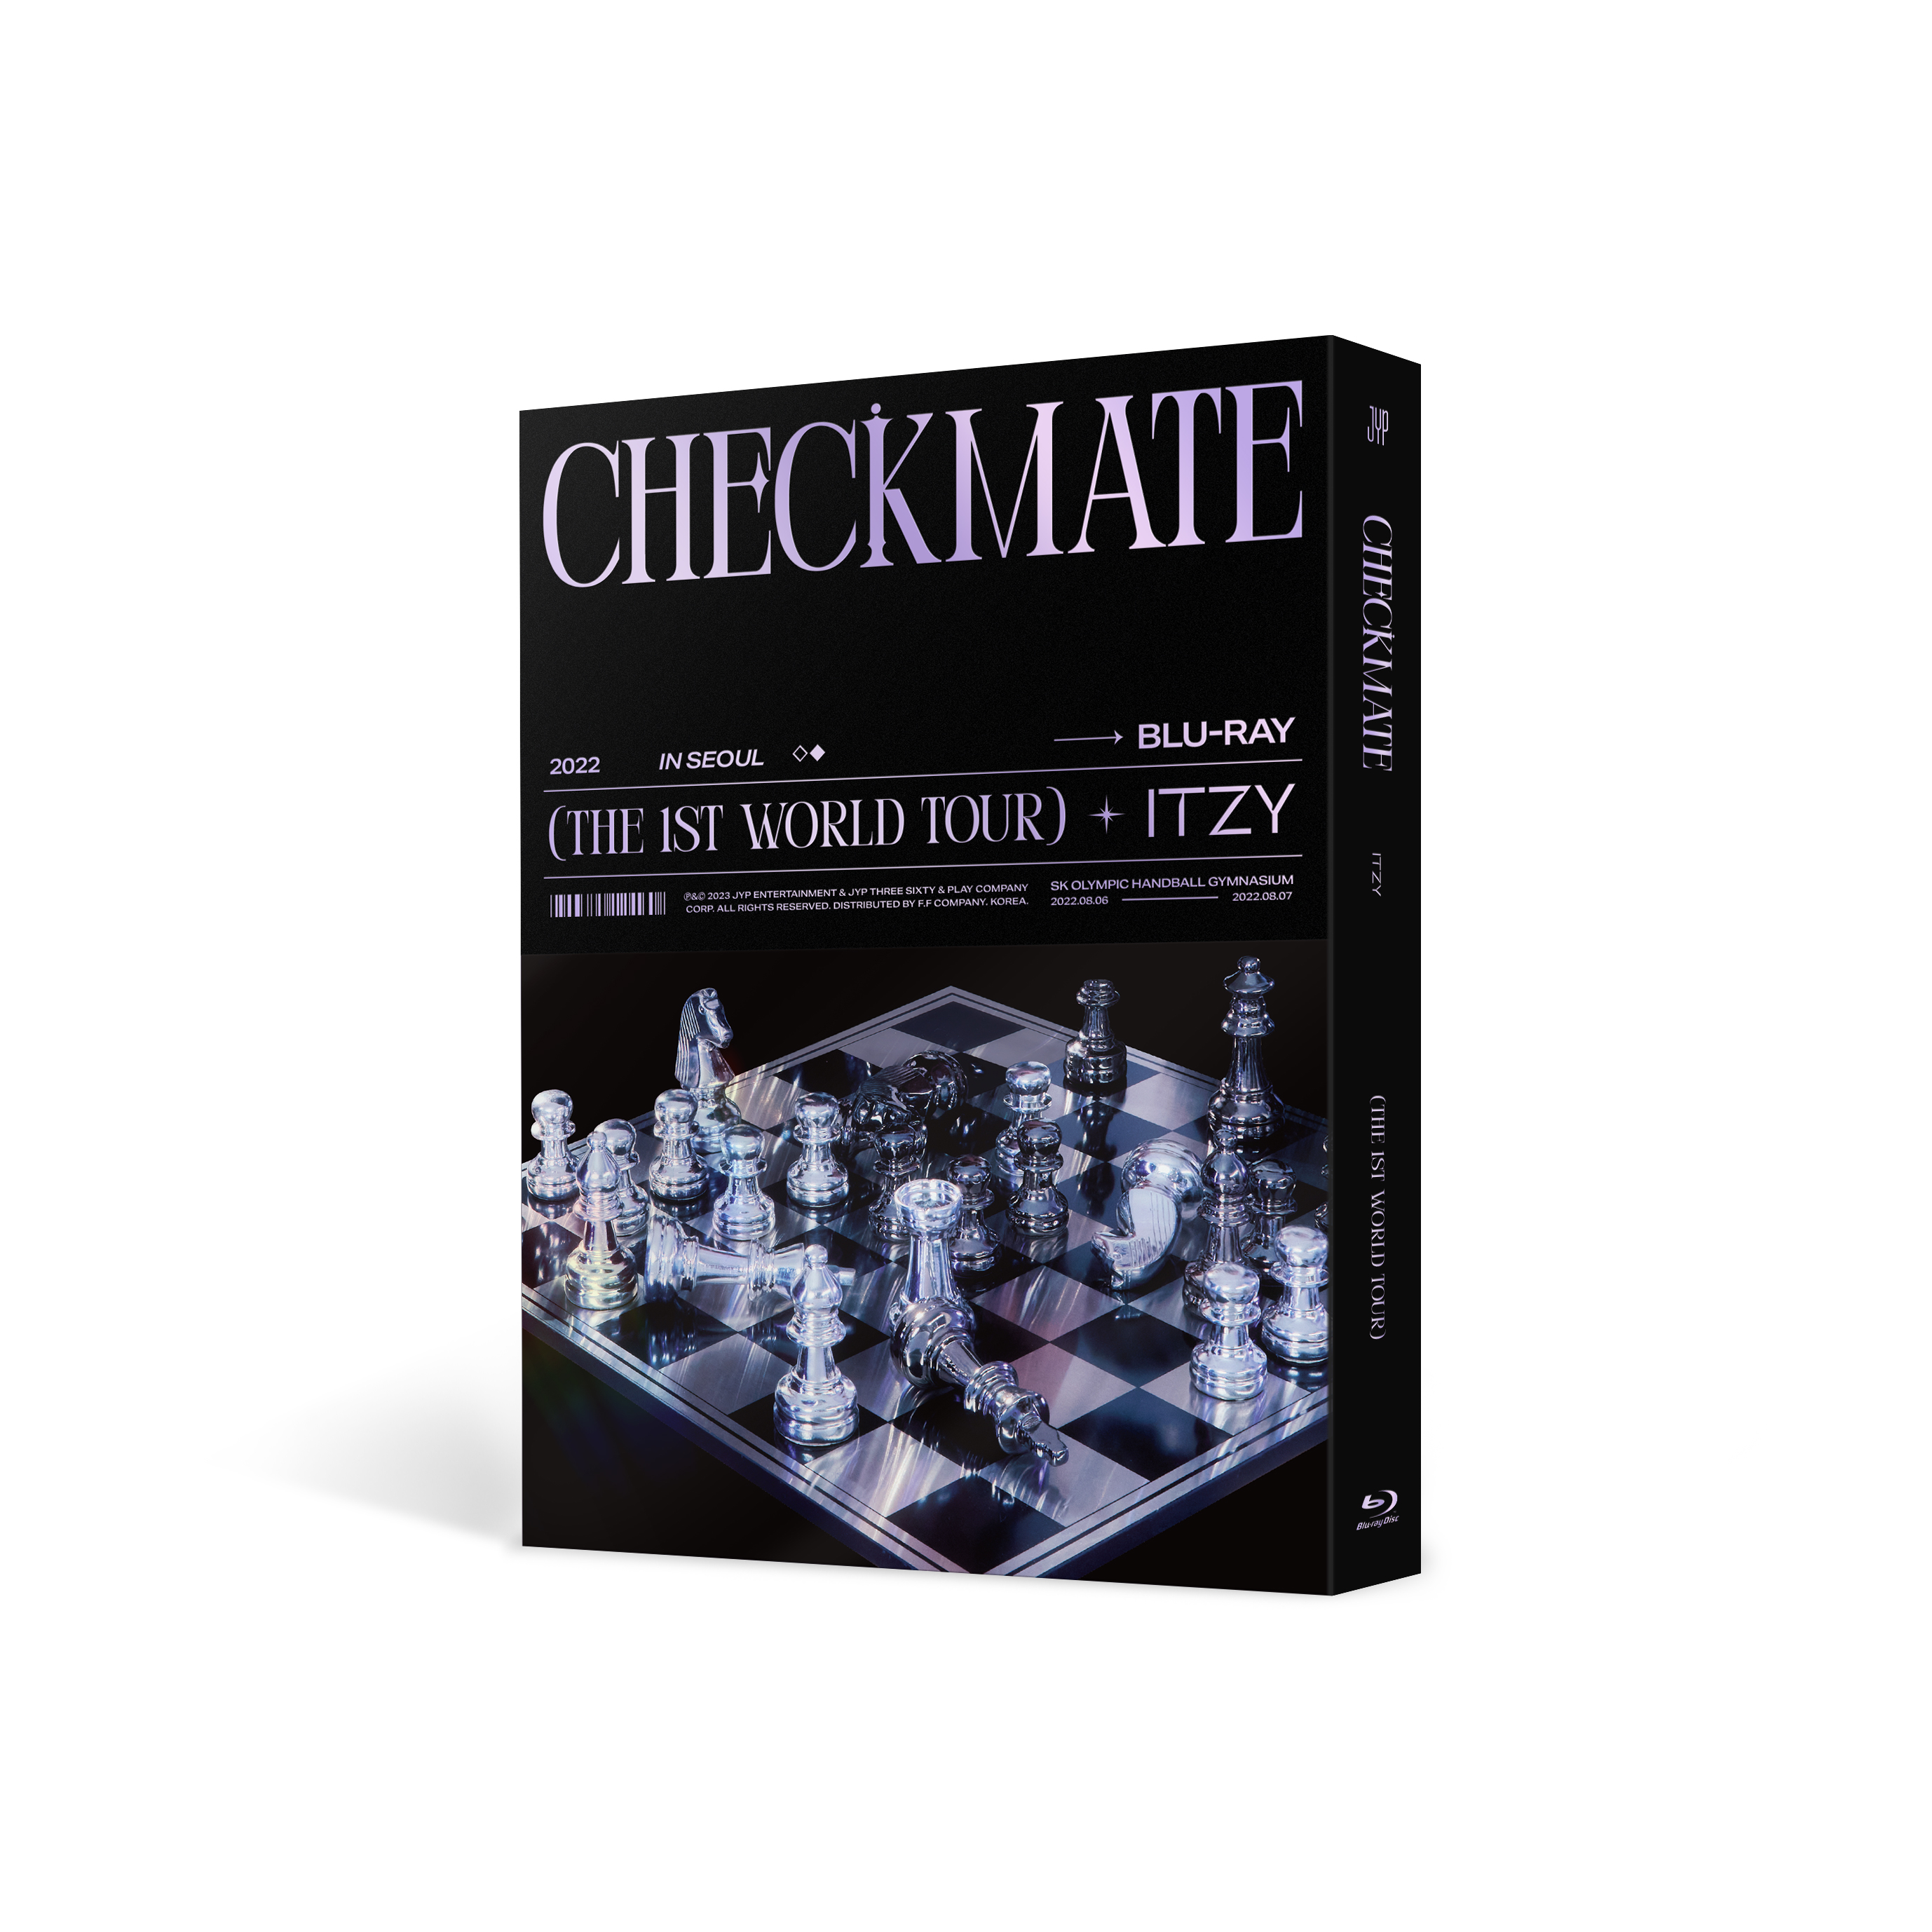 jp.ktown4u.com : ITZY - 2022 ITZY THE 1ST WORLD TOUR [CHECKMATE ...